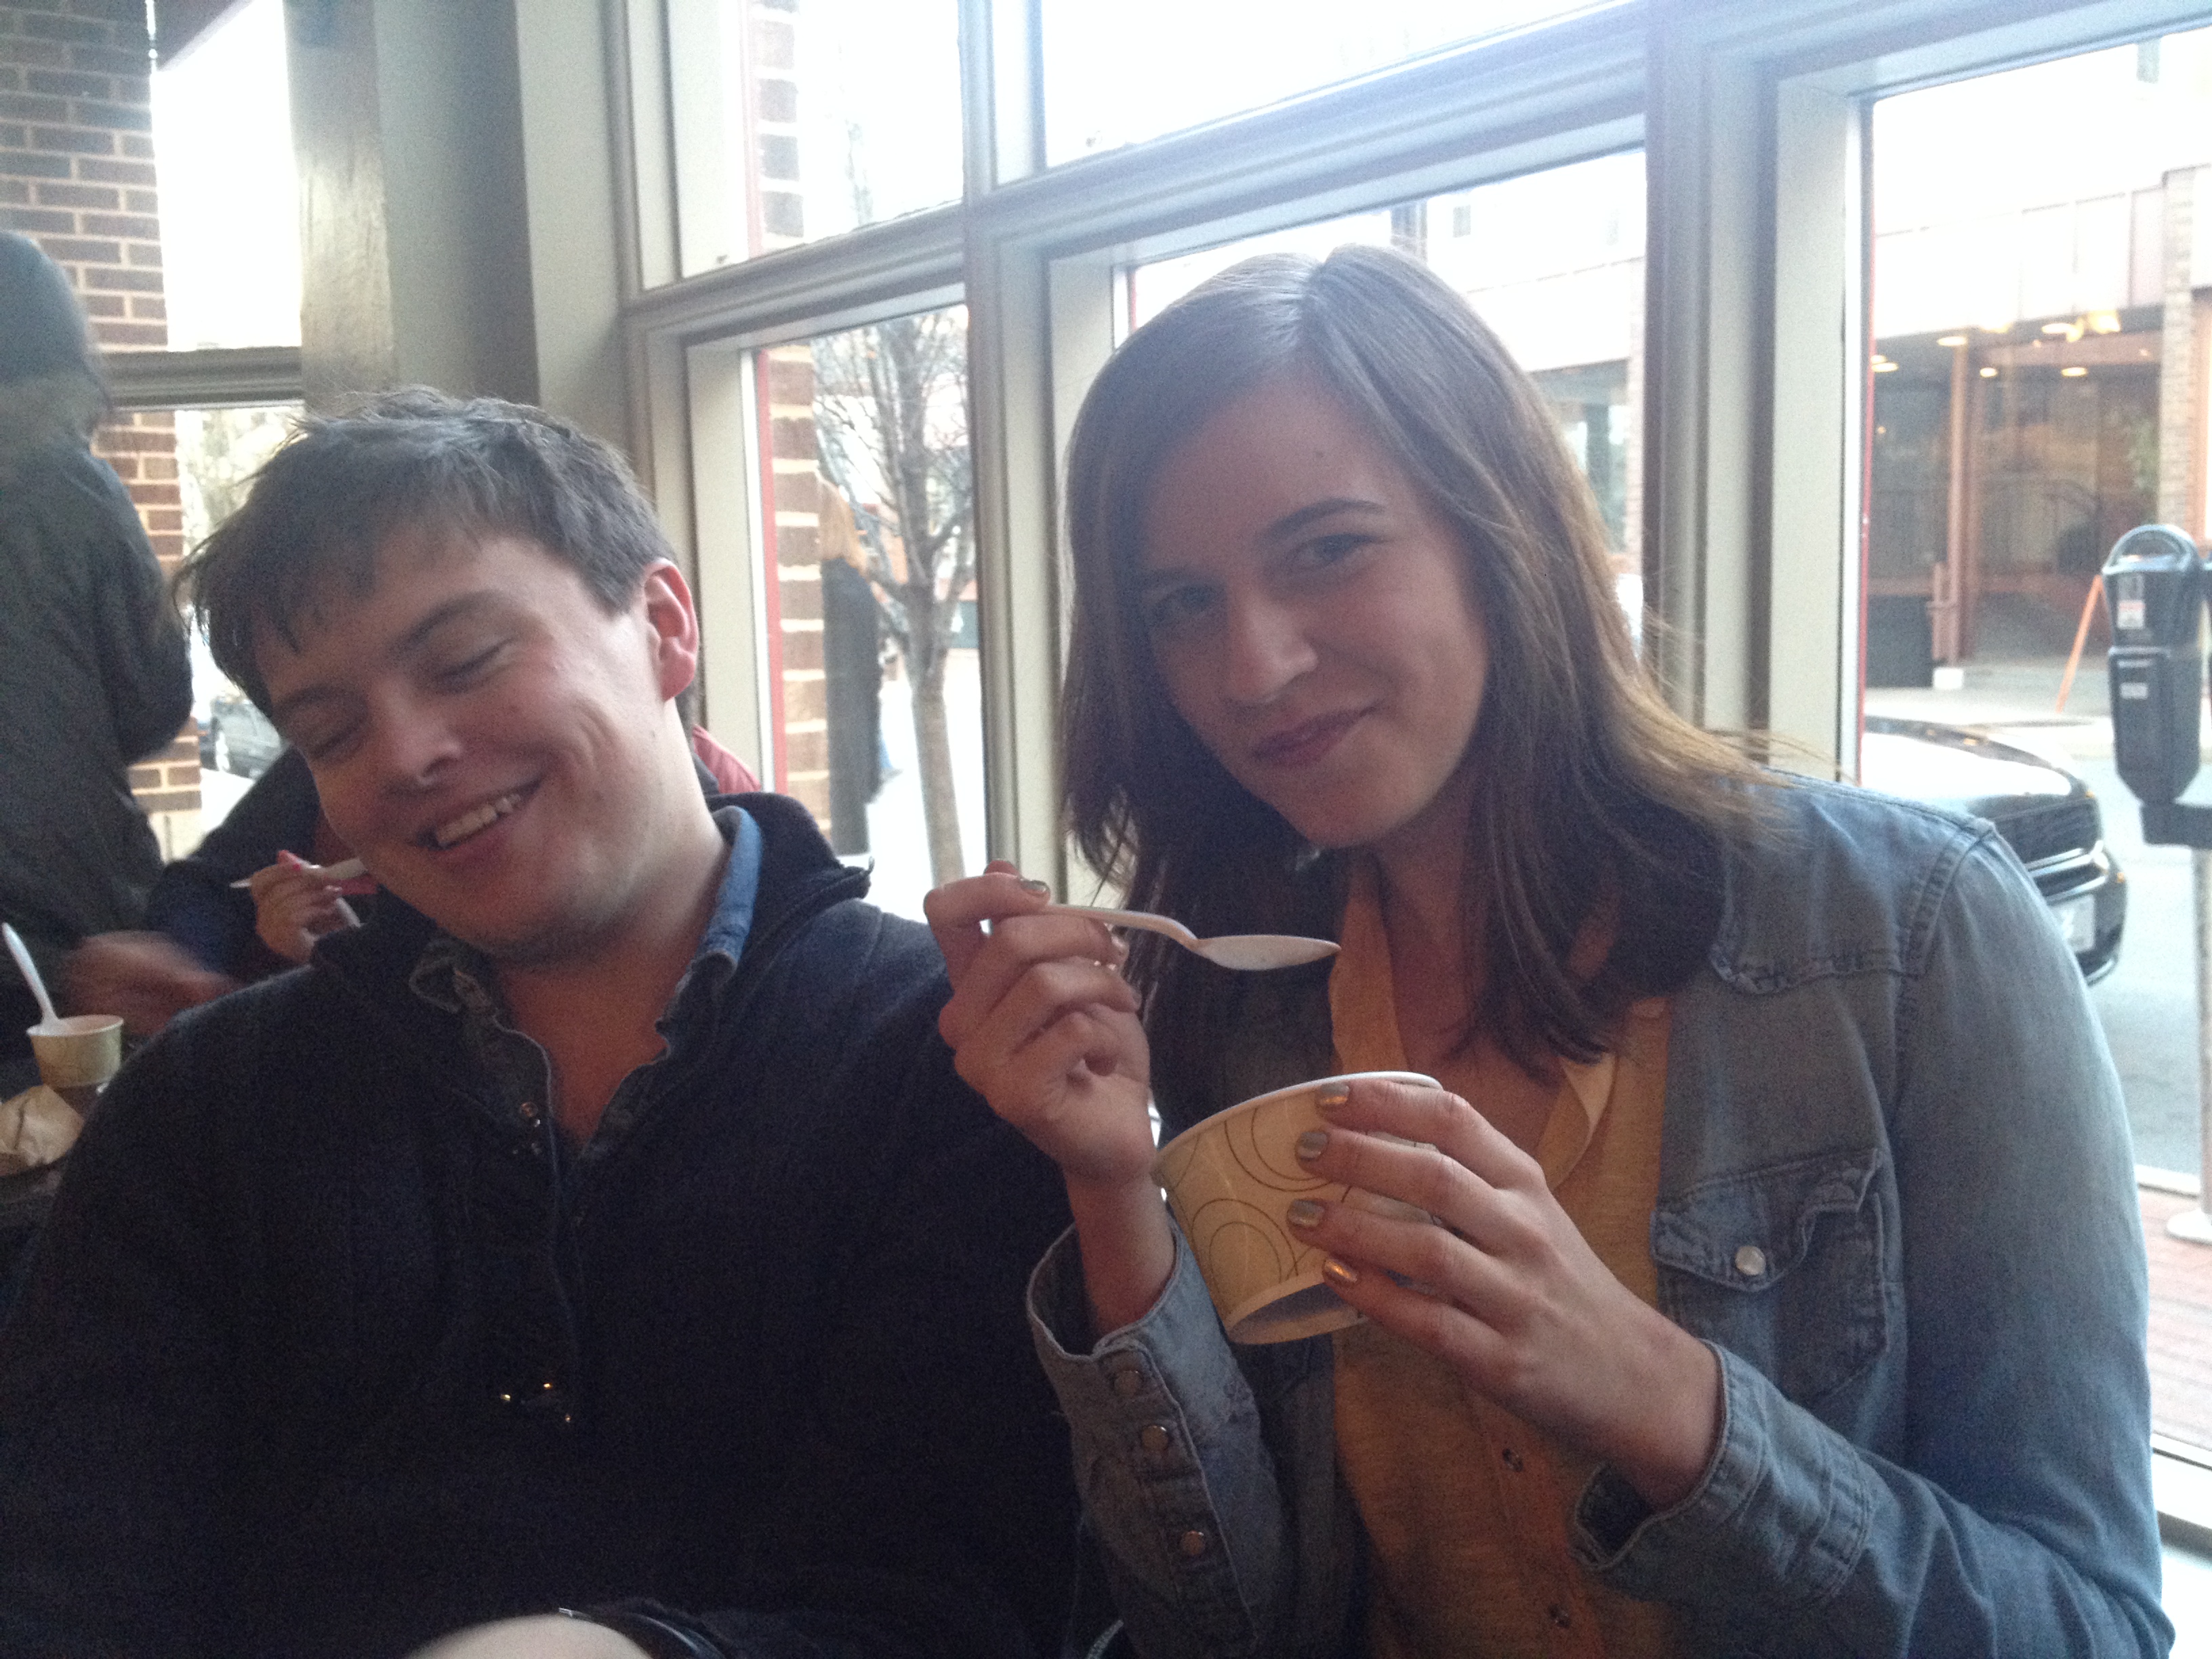 My friend Rachel attractively eating Halo Pub, and her boyfriend James, looking sort of out of it.